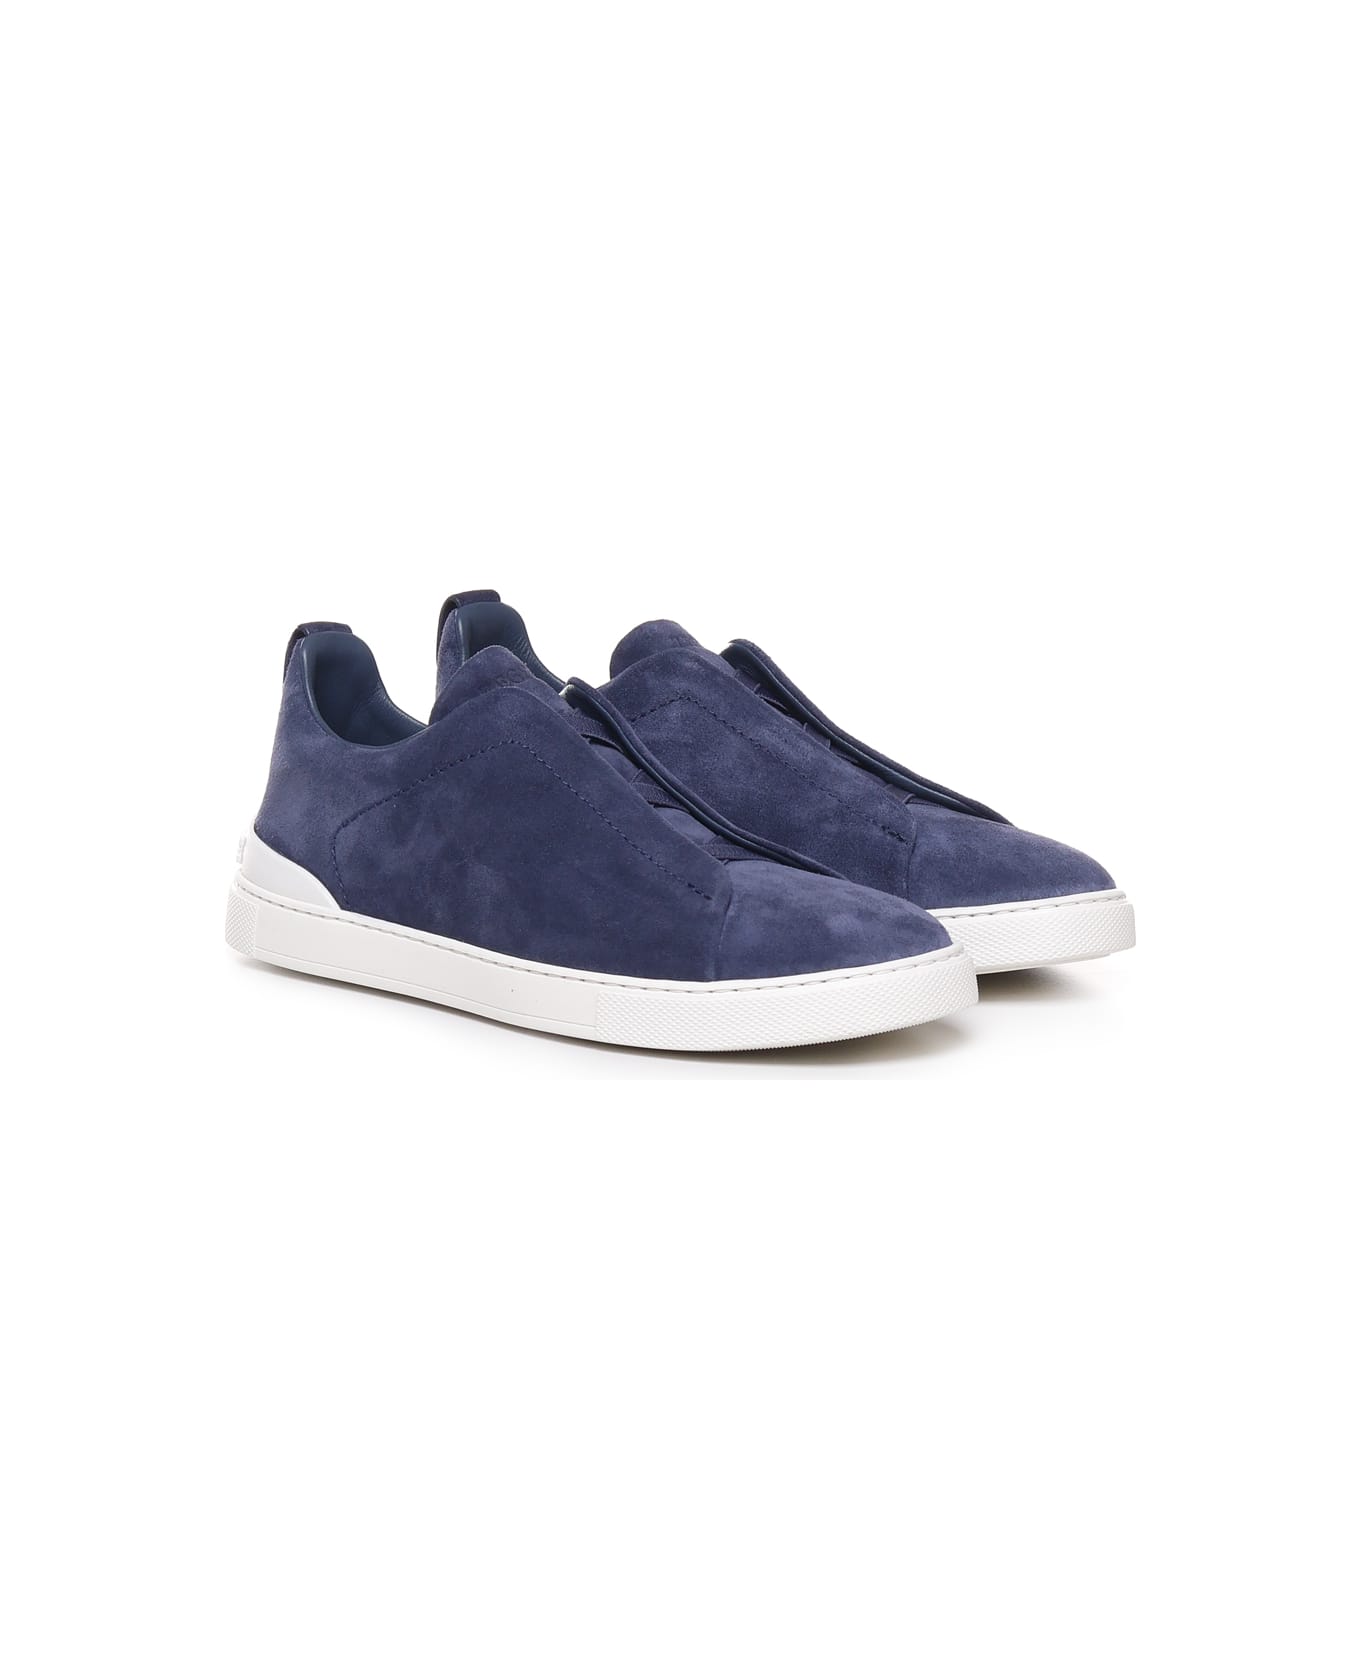 Zegna Sneakers Without Laces - Blue